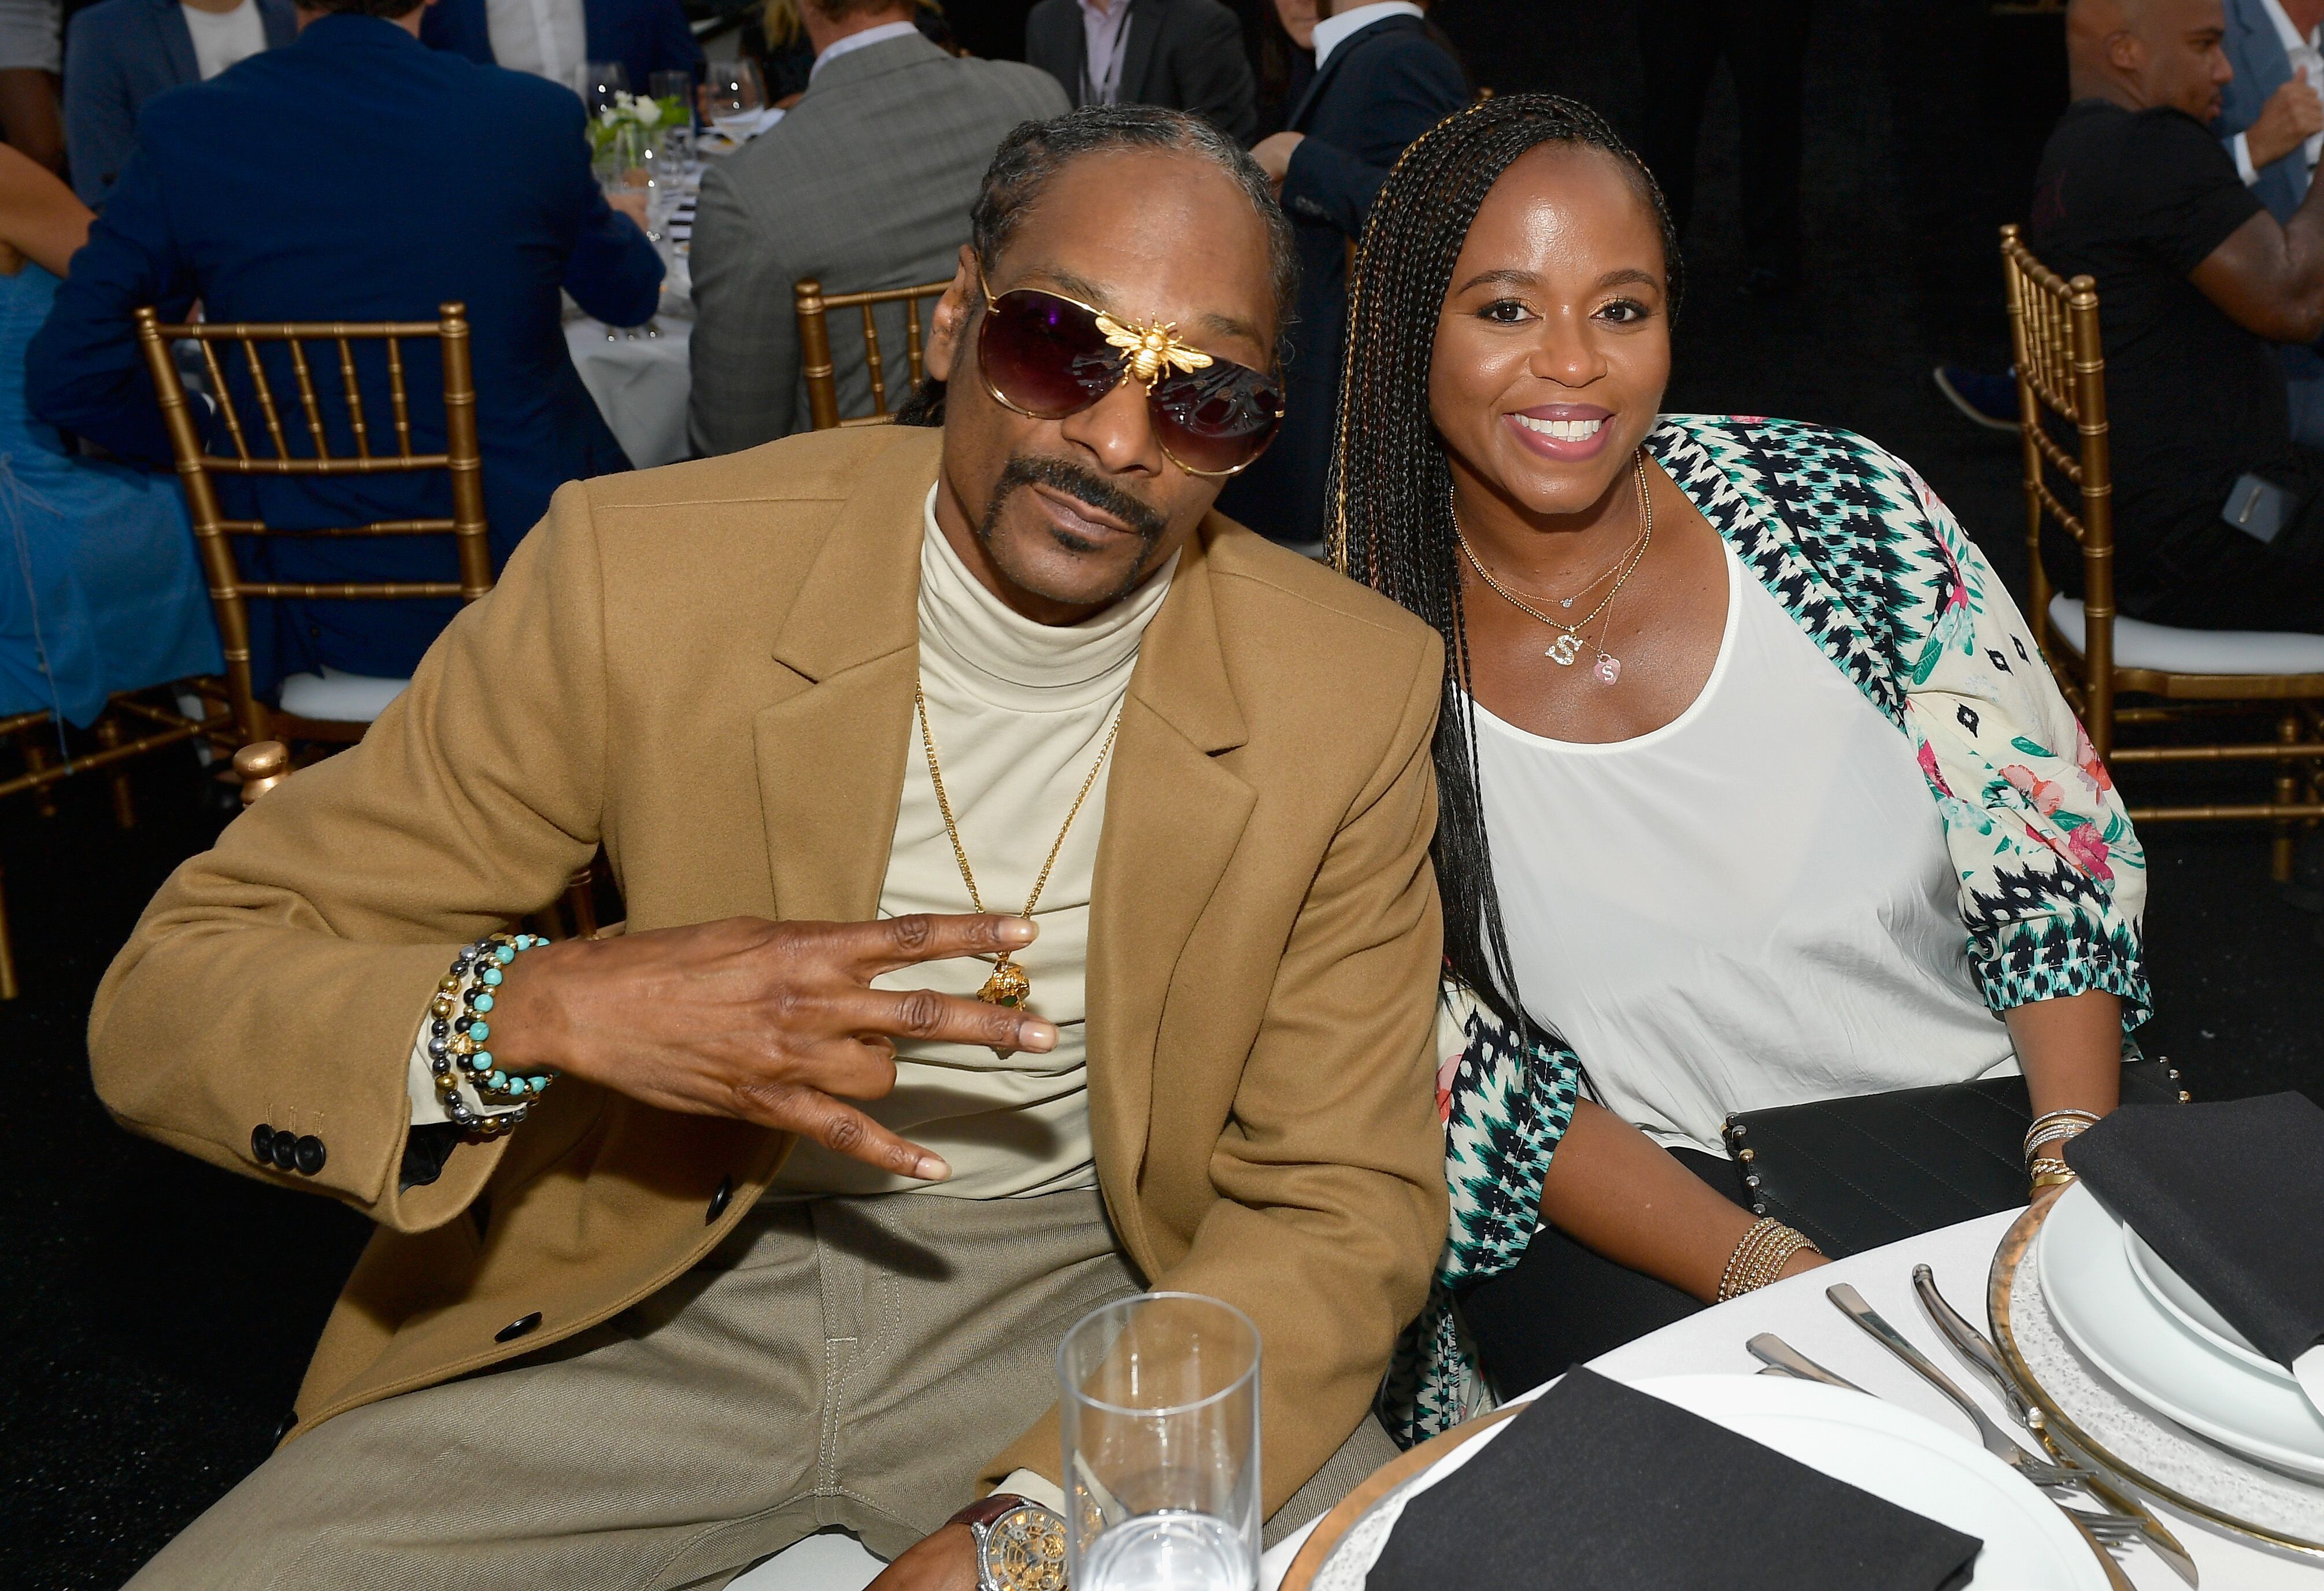 Snoop Dogg and Shante Broadus attend the 33rd Annual Cedars-Sinai Sports Spectacular at The Compound on July 15, 2018 in Inglewood, California. | Source: Getty Images